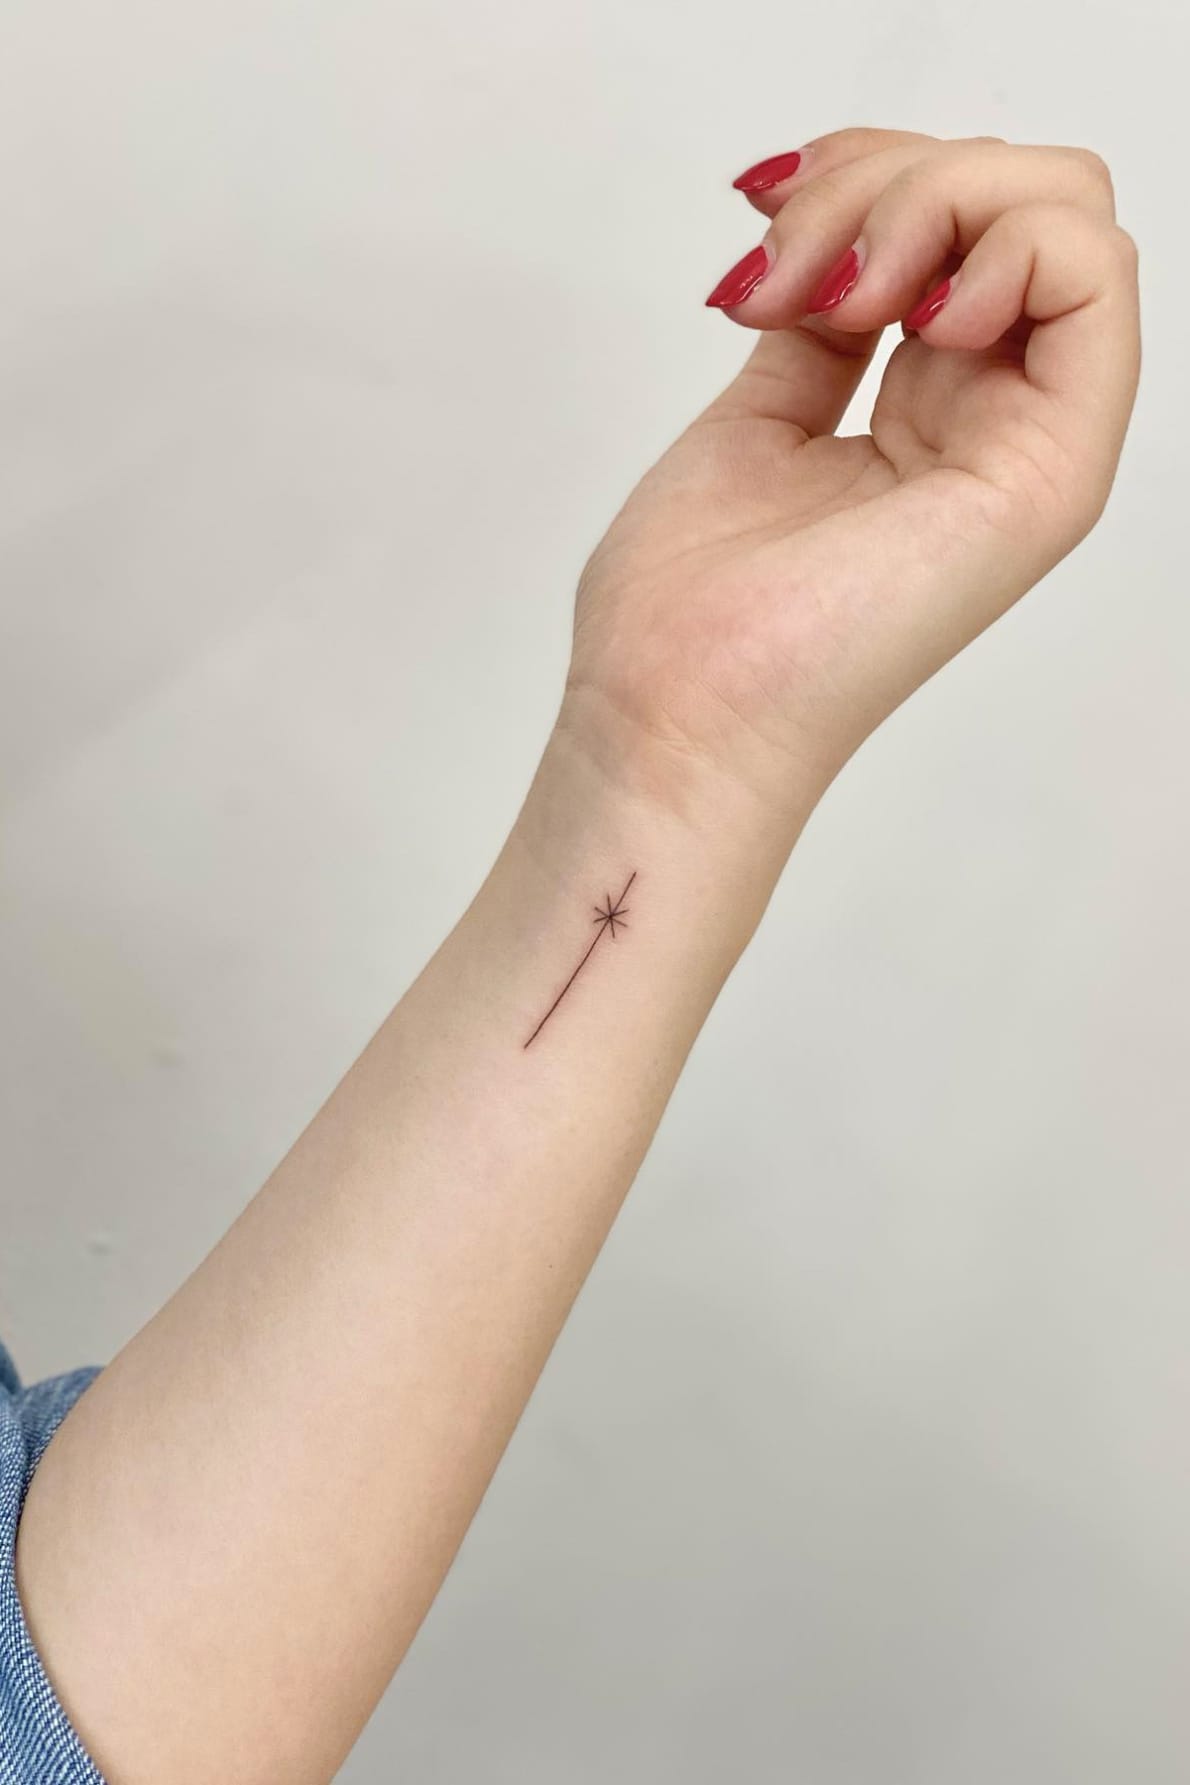 Line and Small Star Tattoo